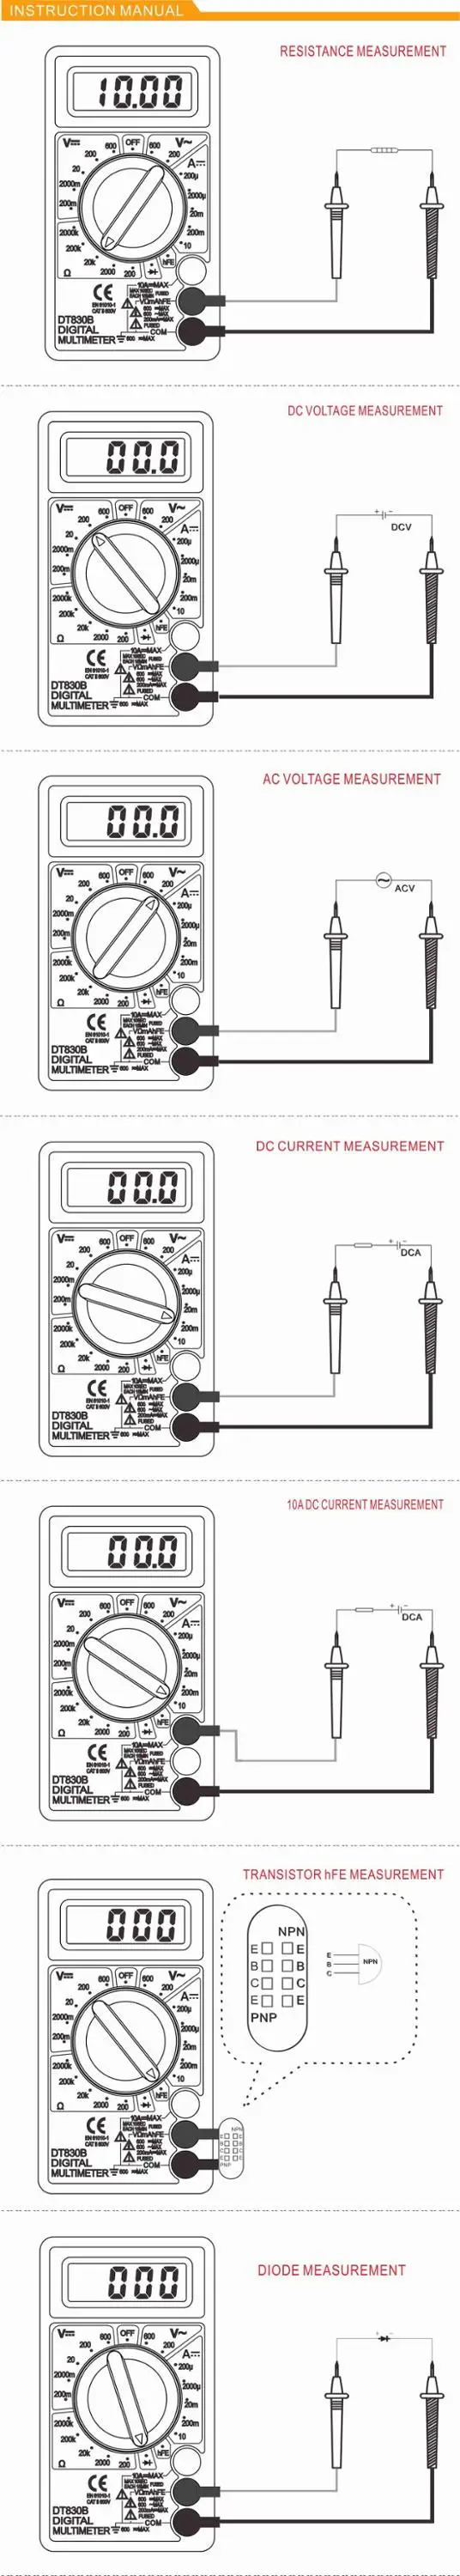 CE multimeter DT830B with Safety Design Latest CAT II